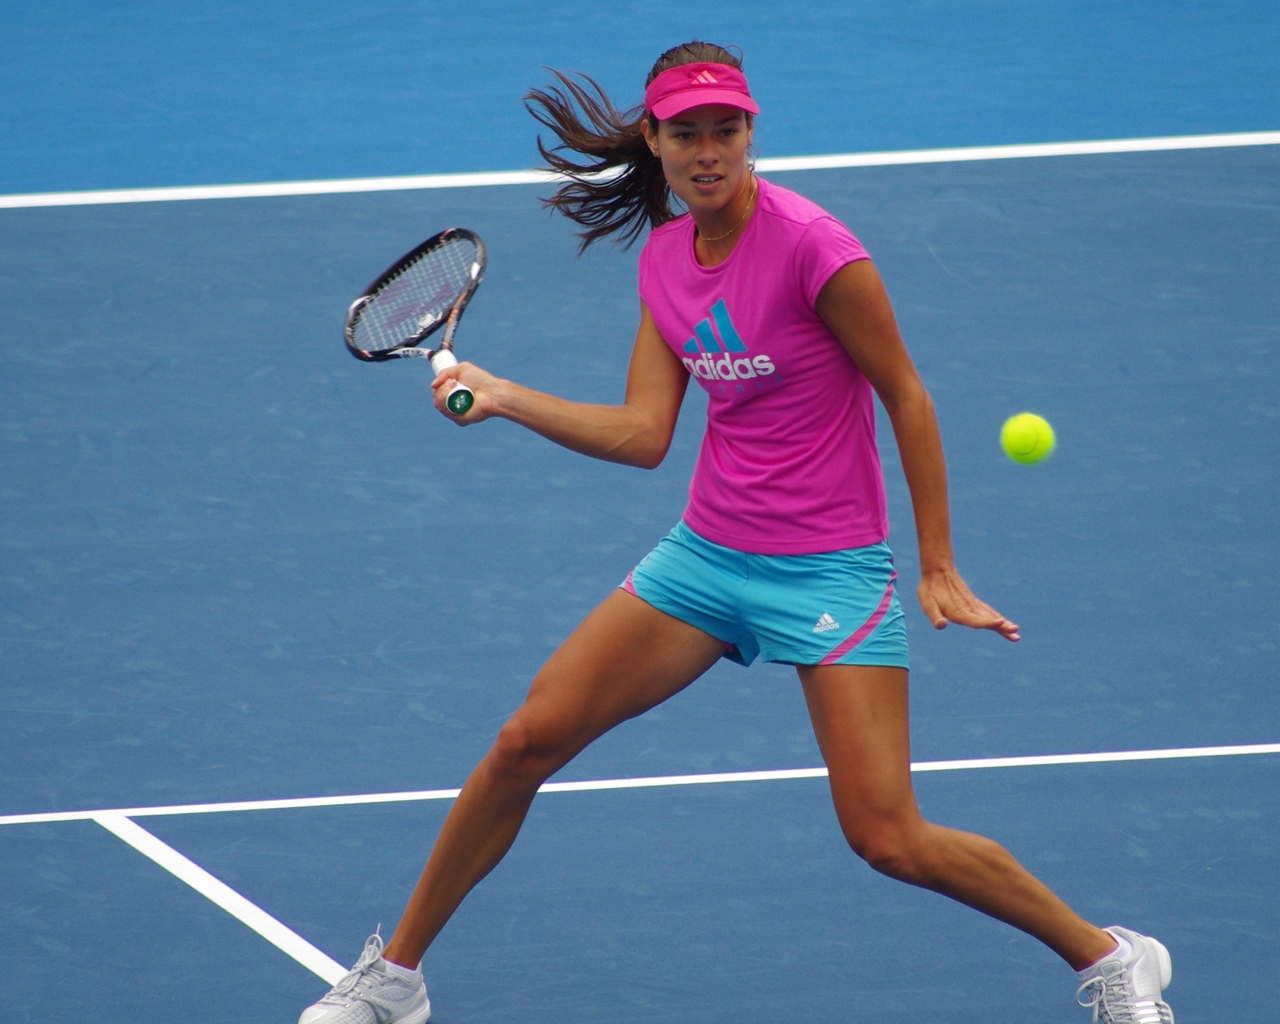 Ana Ivanovic Practicing for 1280 x 1024 resolution